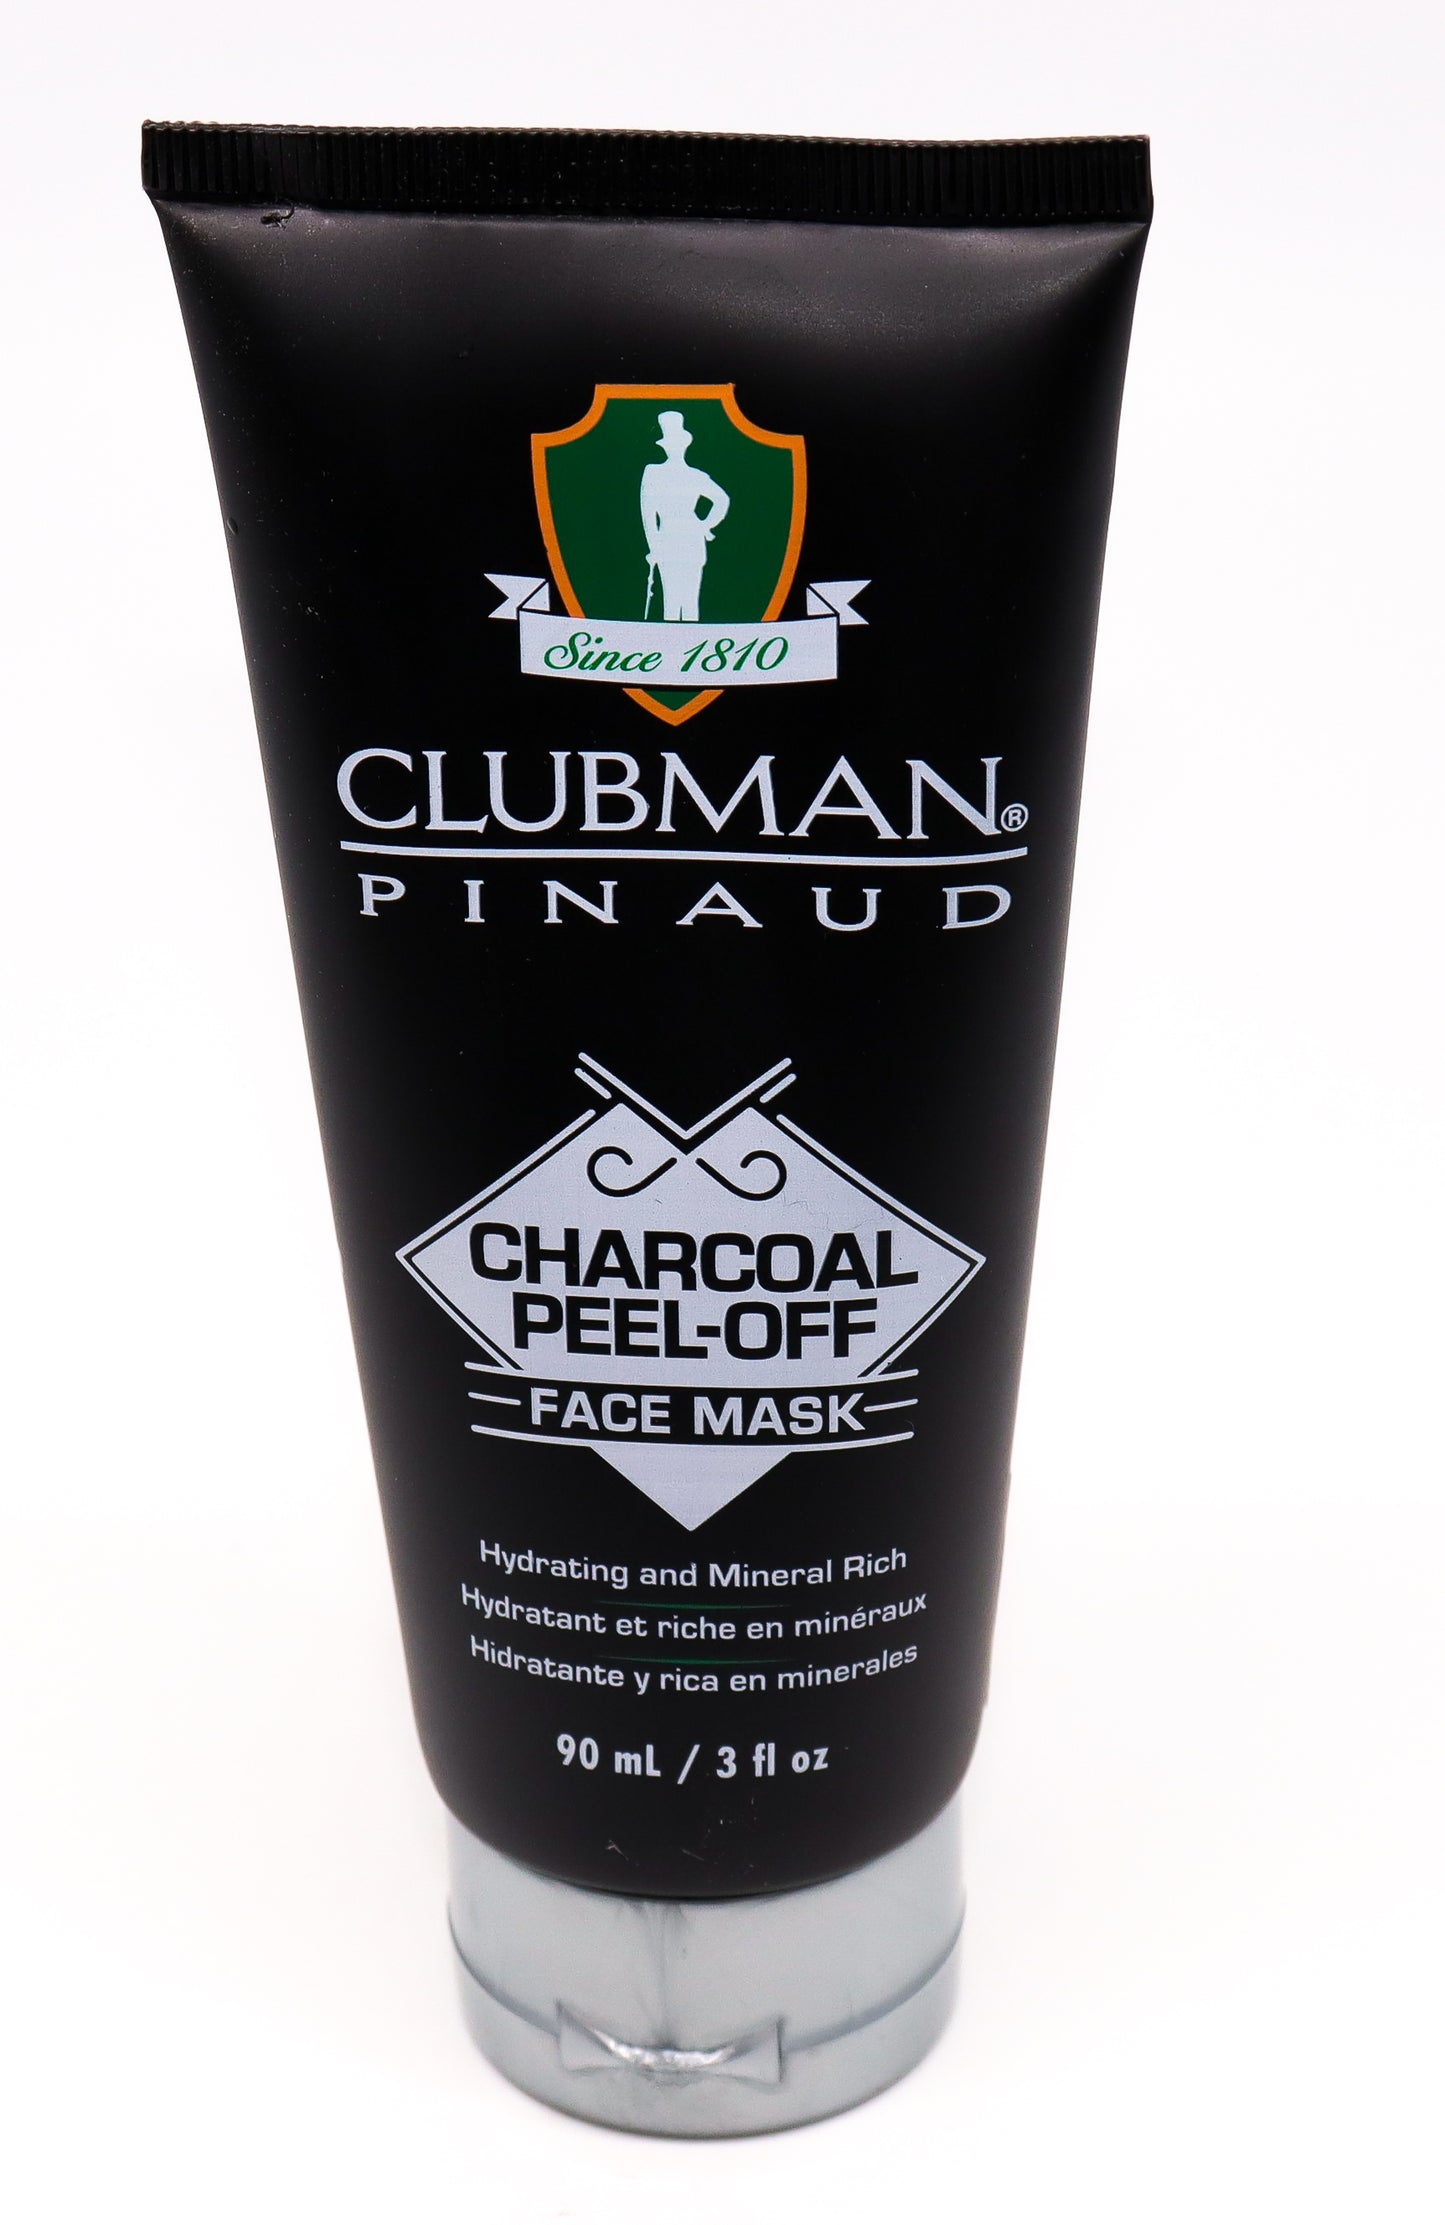 Clubman Pinaud Charcoal Face Mask